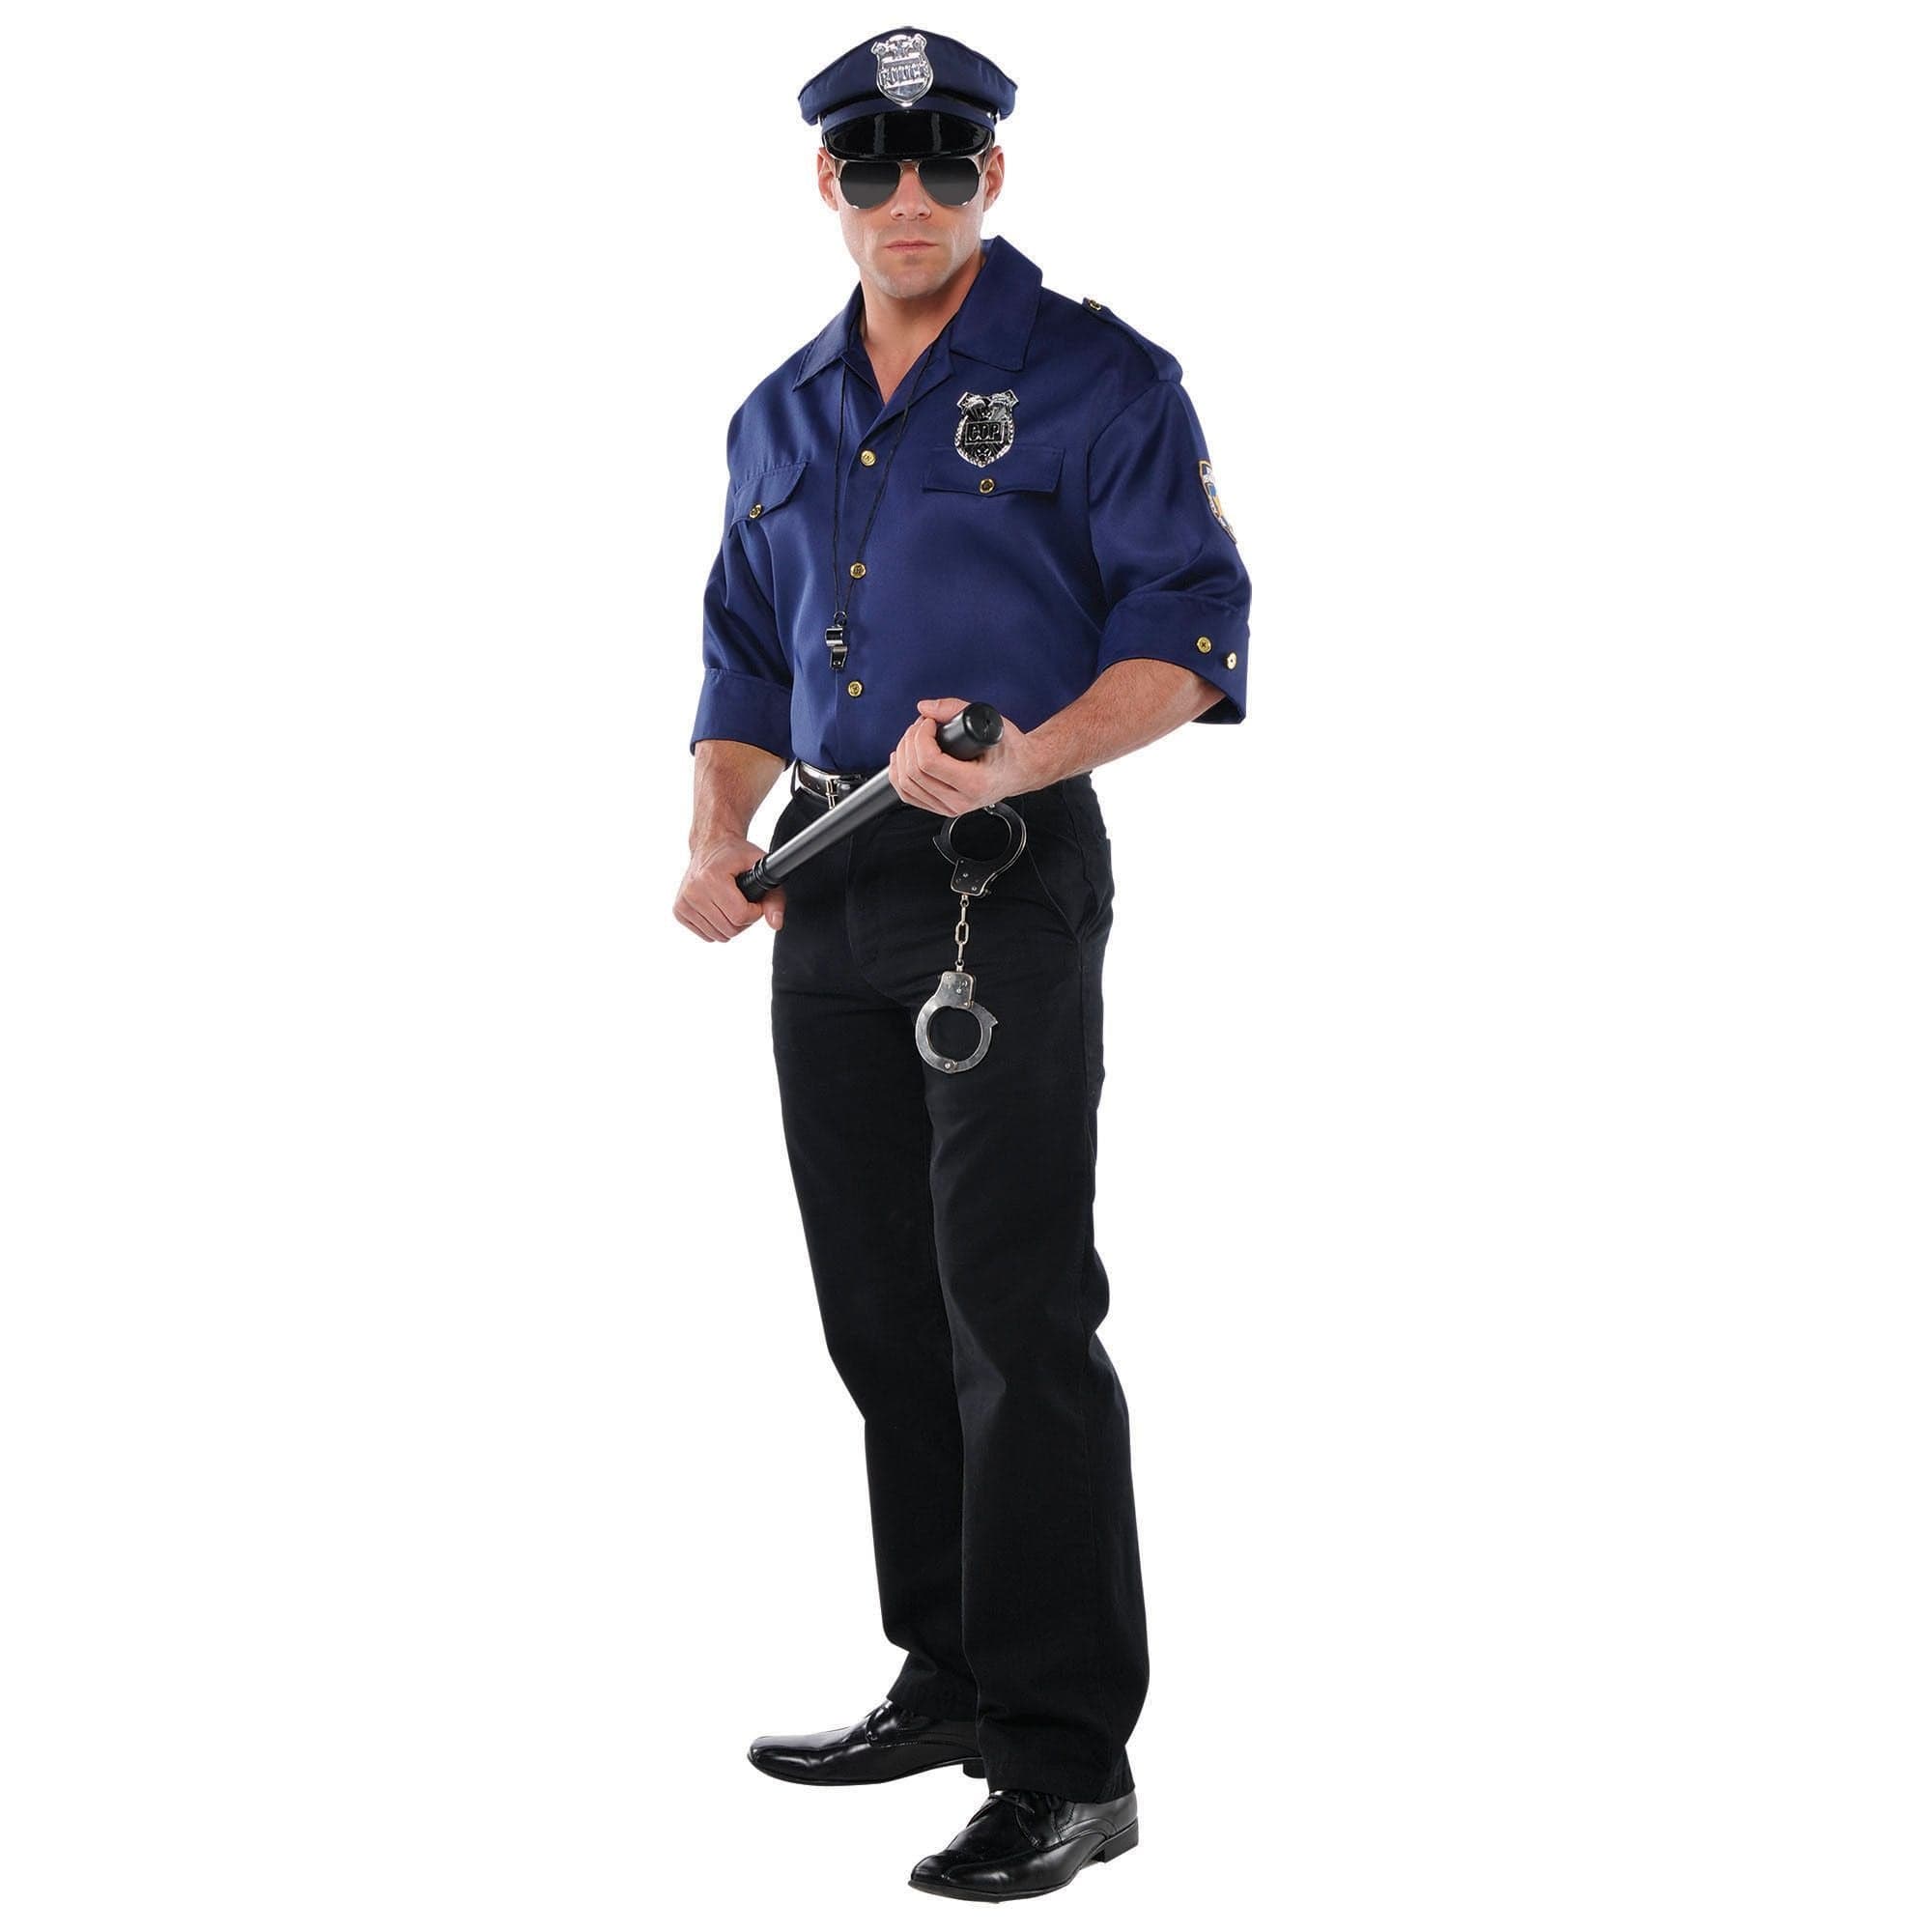 Amscan COSTUMES: ACCESSORIES Police Shirt - Adult Standard